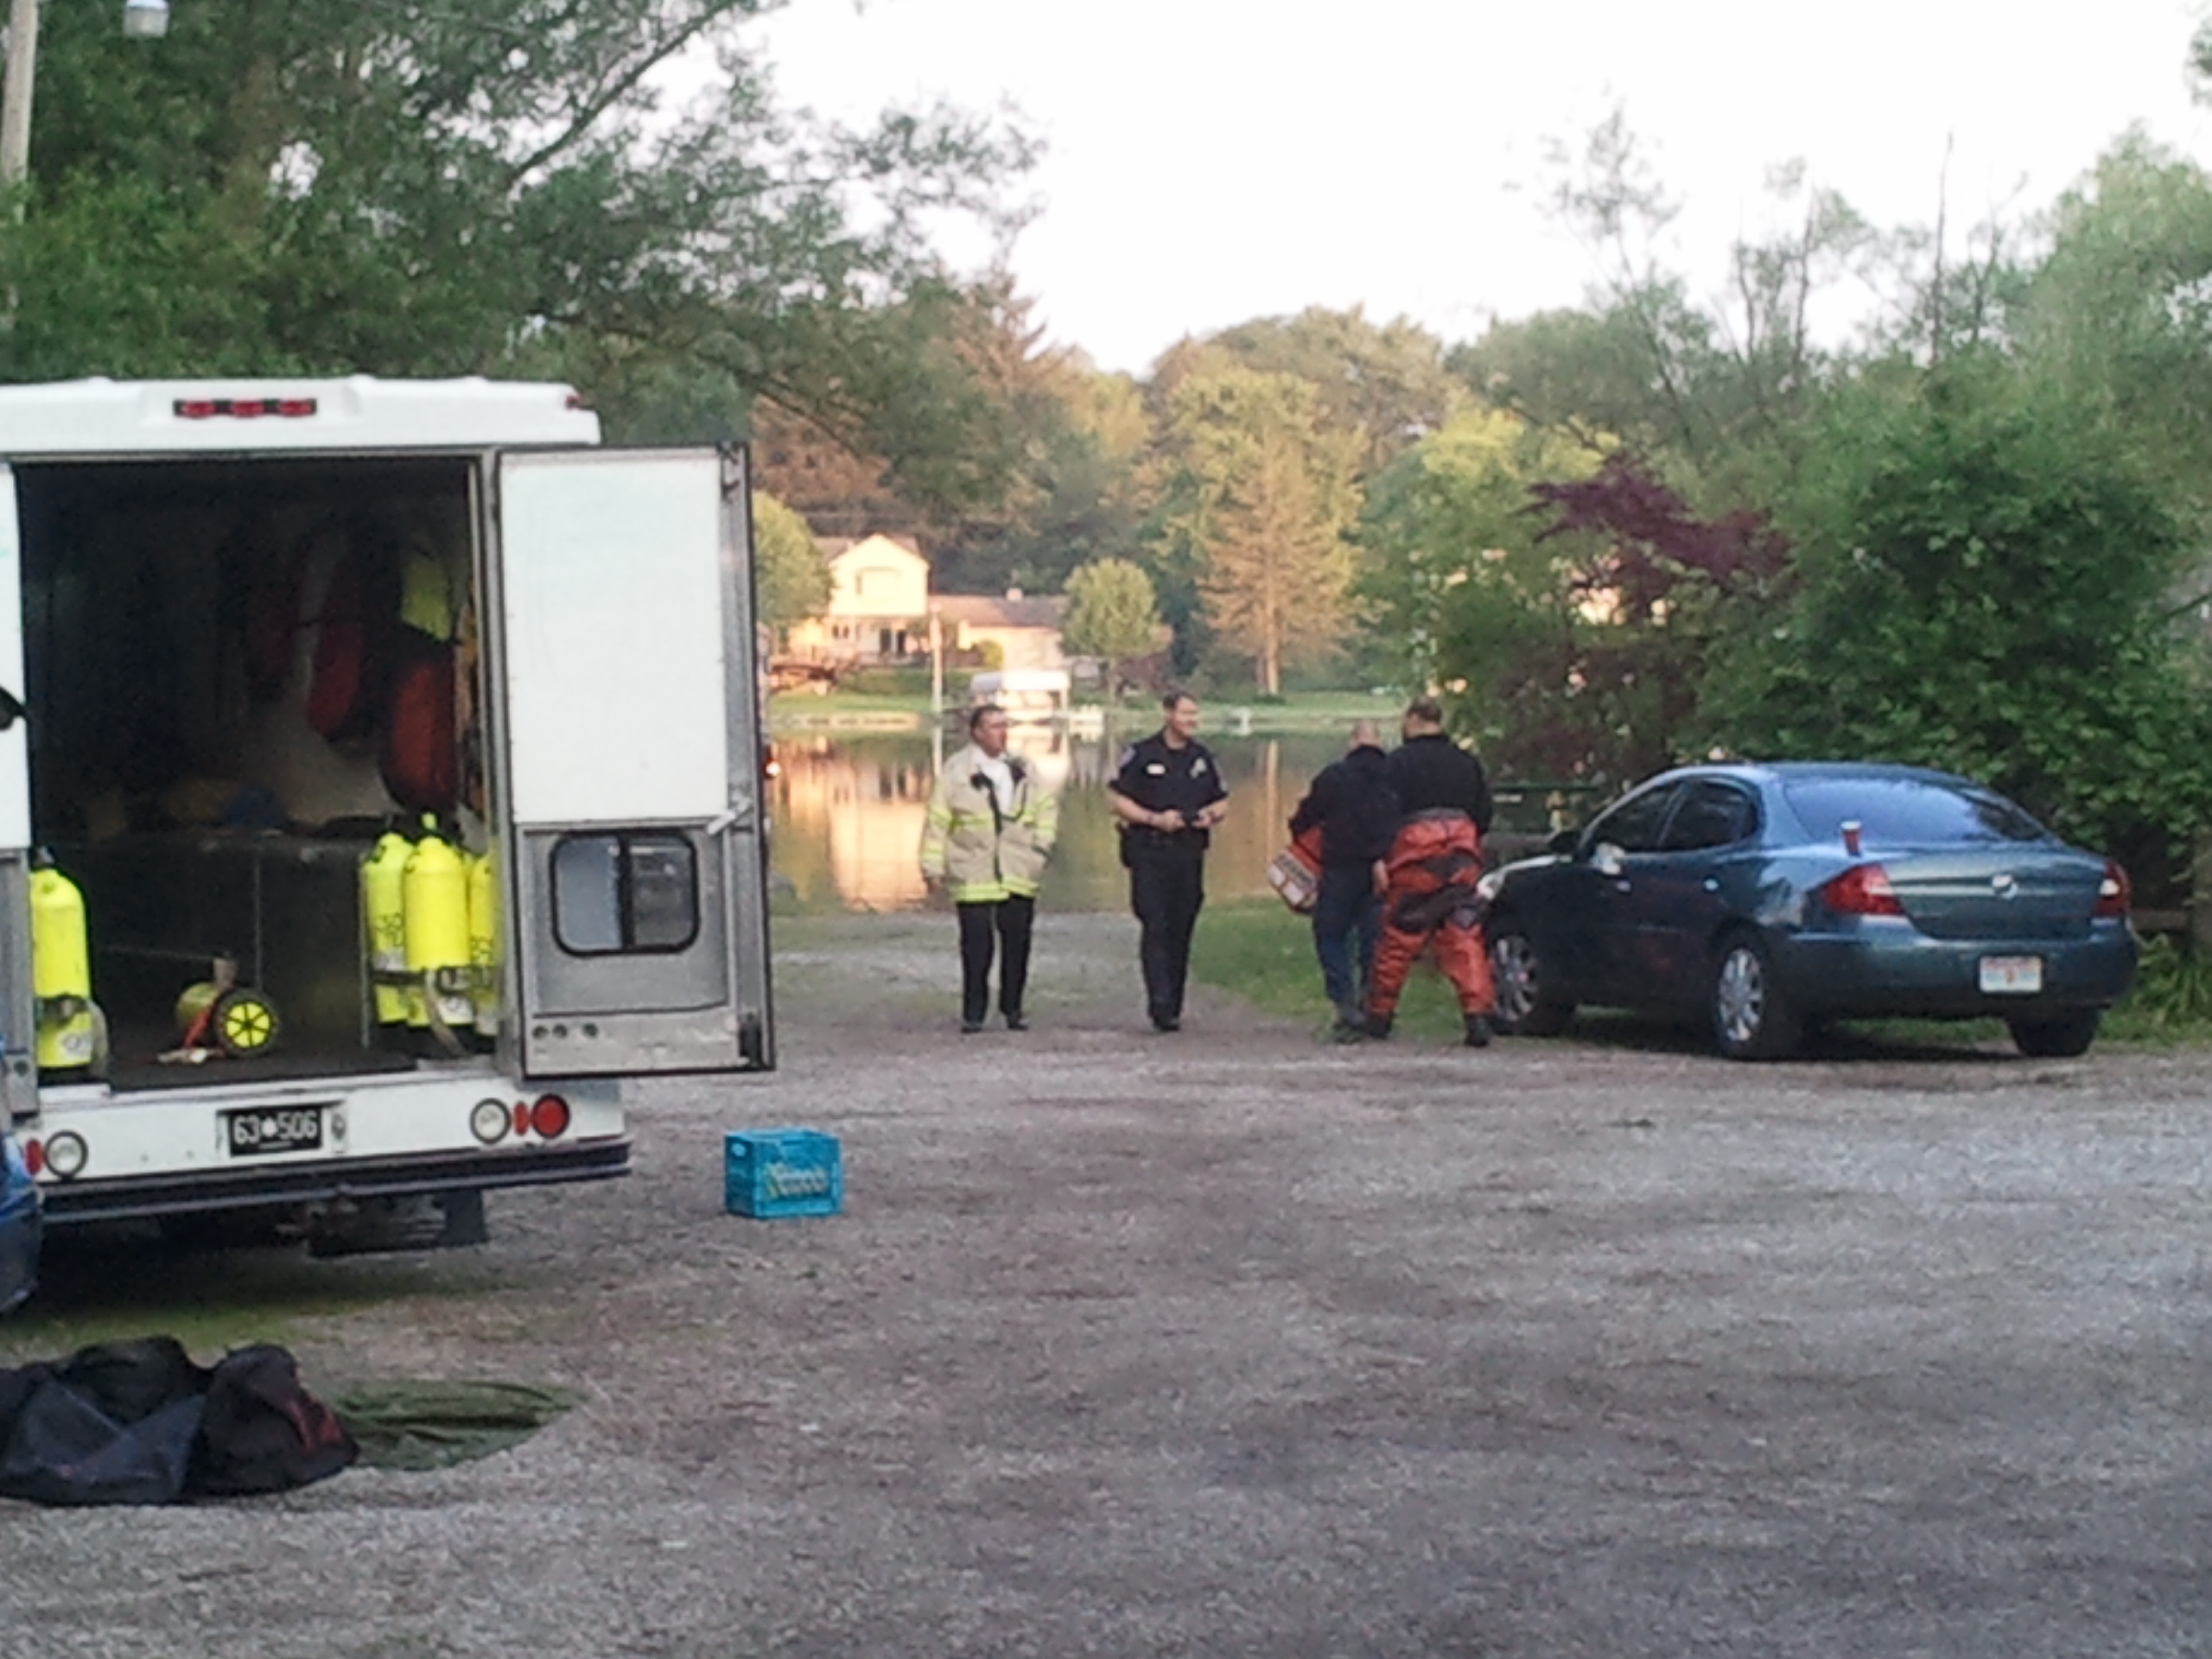 Oakland County Sheiff's Office Dive team members and local West Bloomfield Township police work side-by-side to find missing swimmer. (Credit: Mike Campbell/WWJ Newsradio 950)